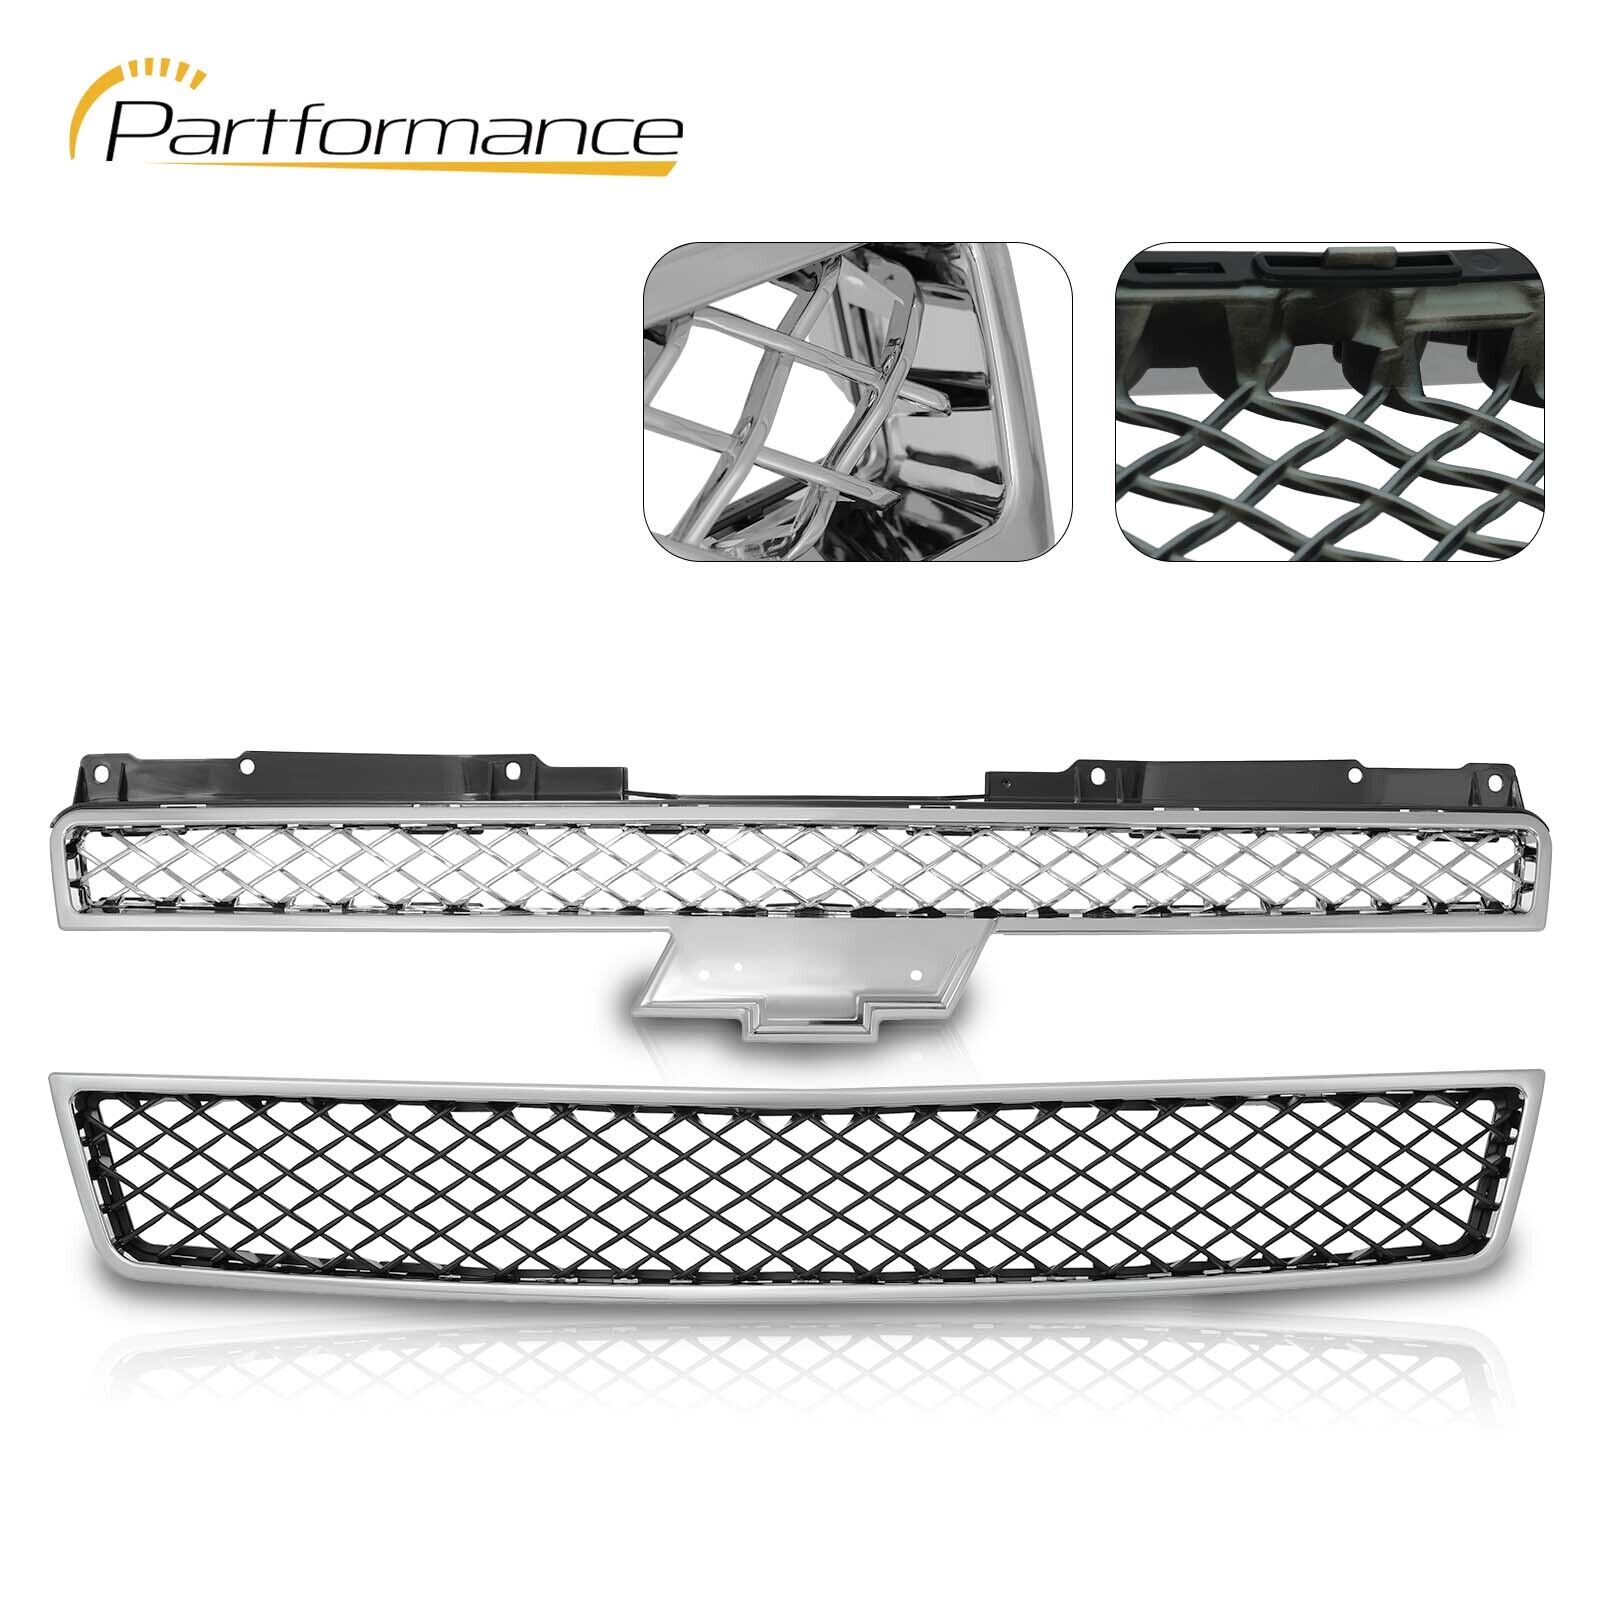 2 Pcs Chrome Front Bumper Grille for 2007-2013 Chevy Avalanche Suburban Tahoe